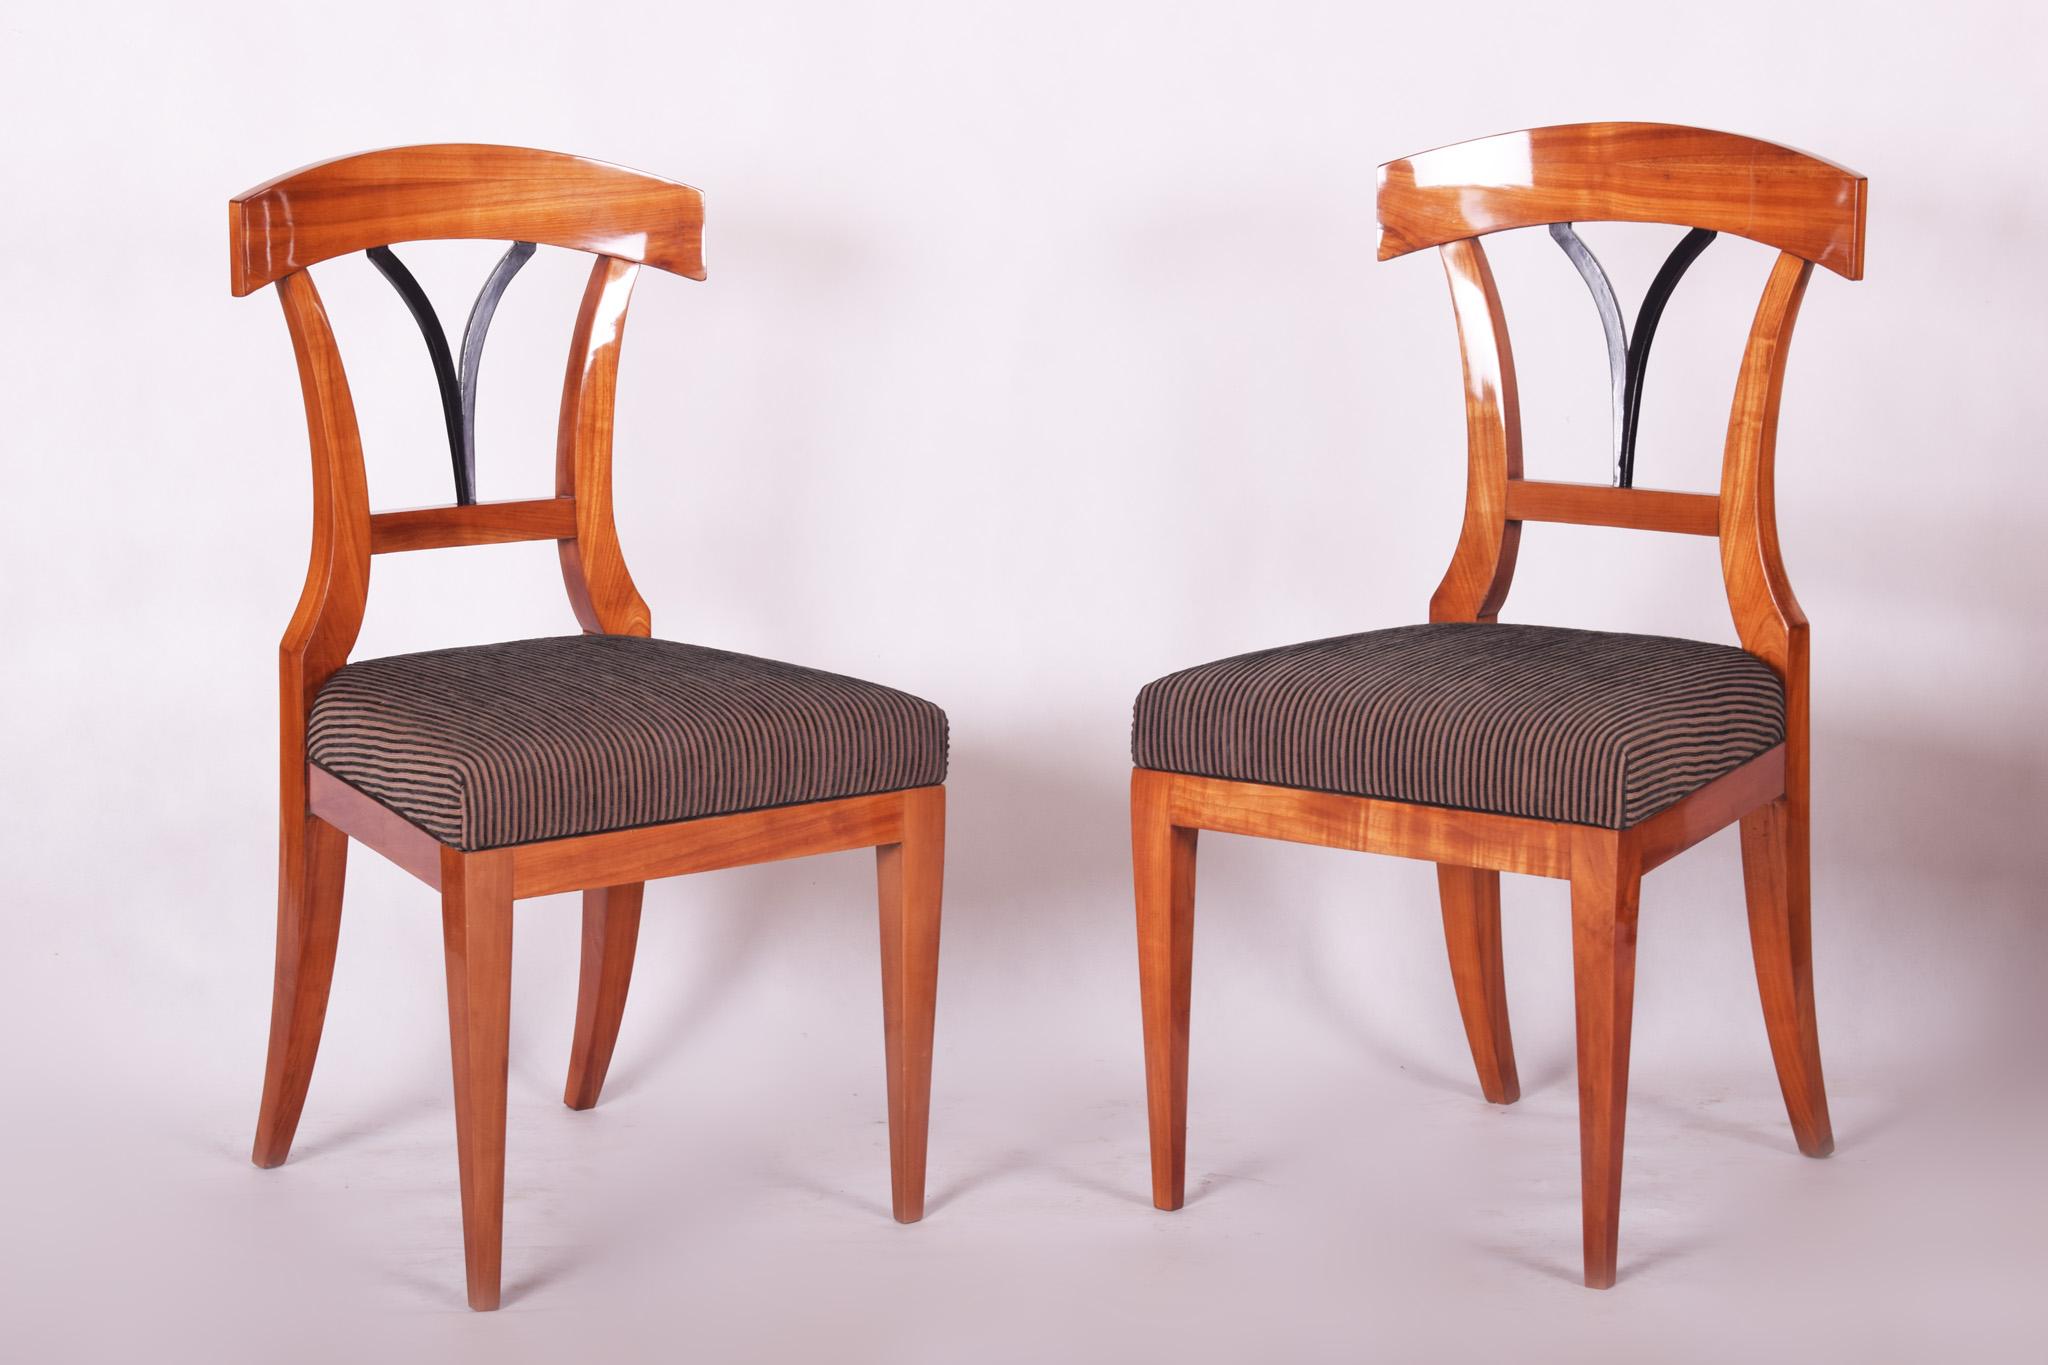 The chairs have been fully restored and are made out of cherry wood.